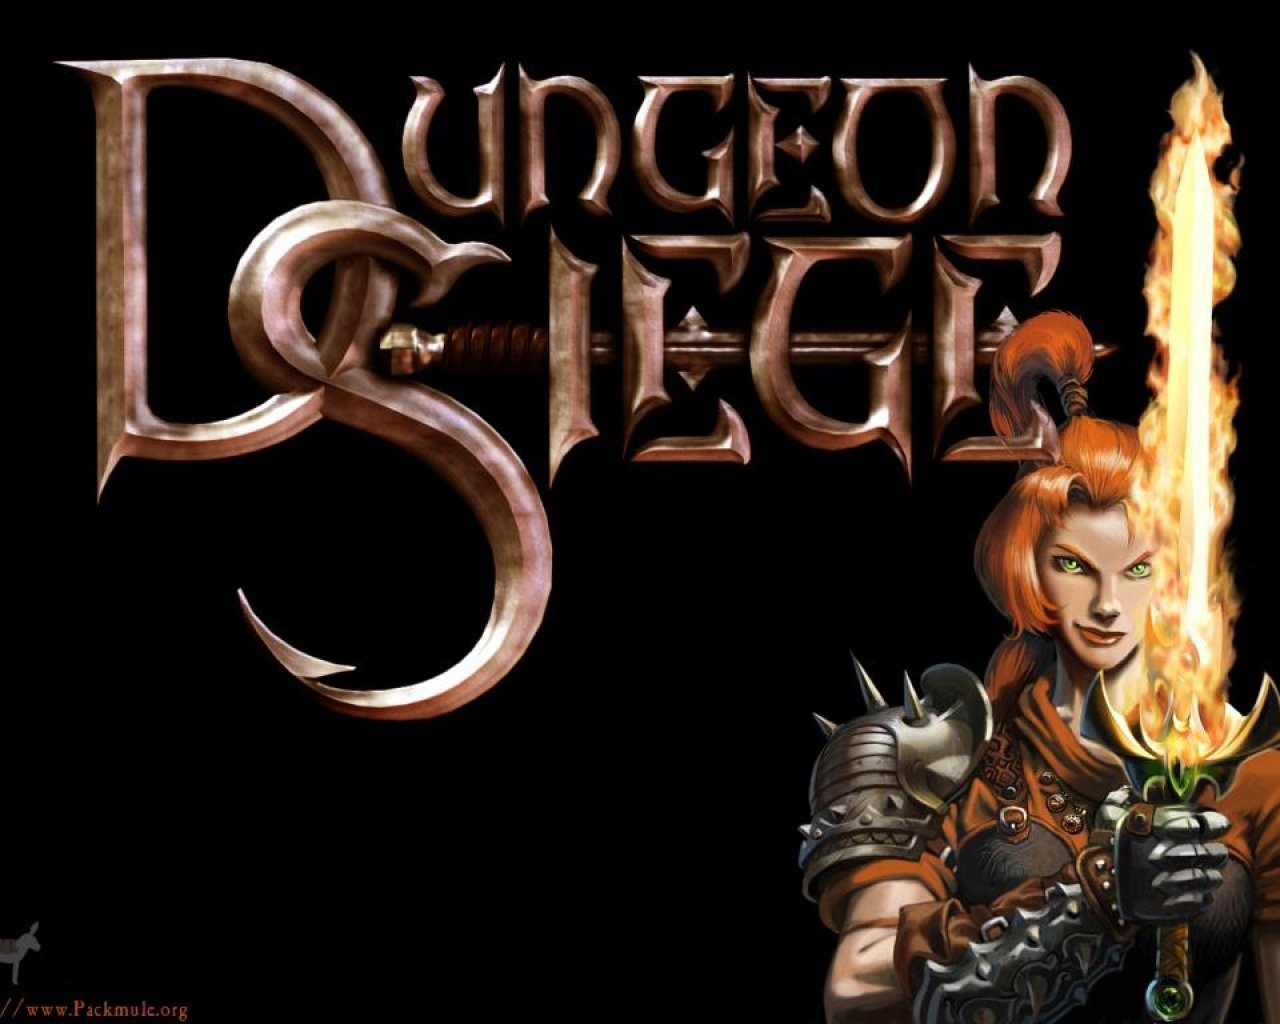 Dungeon Siege 1920X1080 Wallpapers